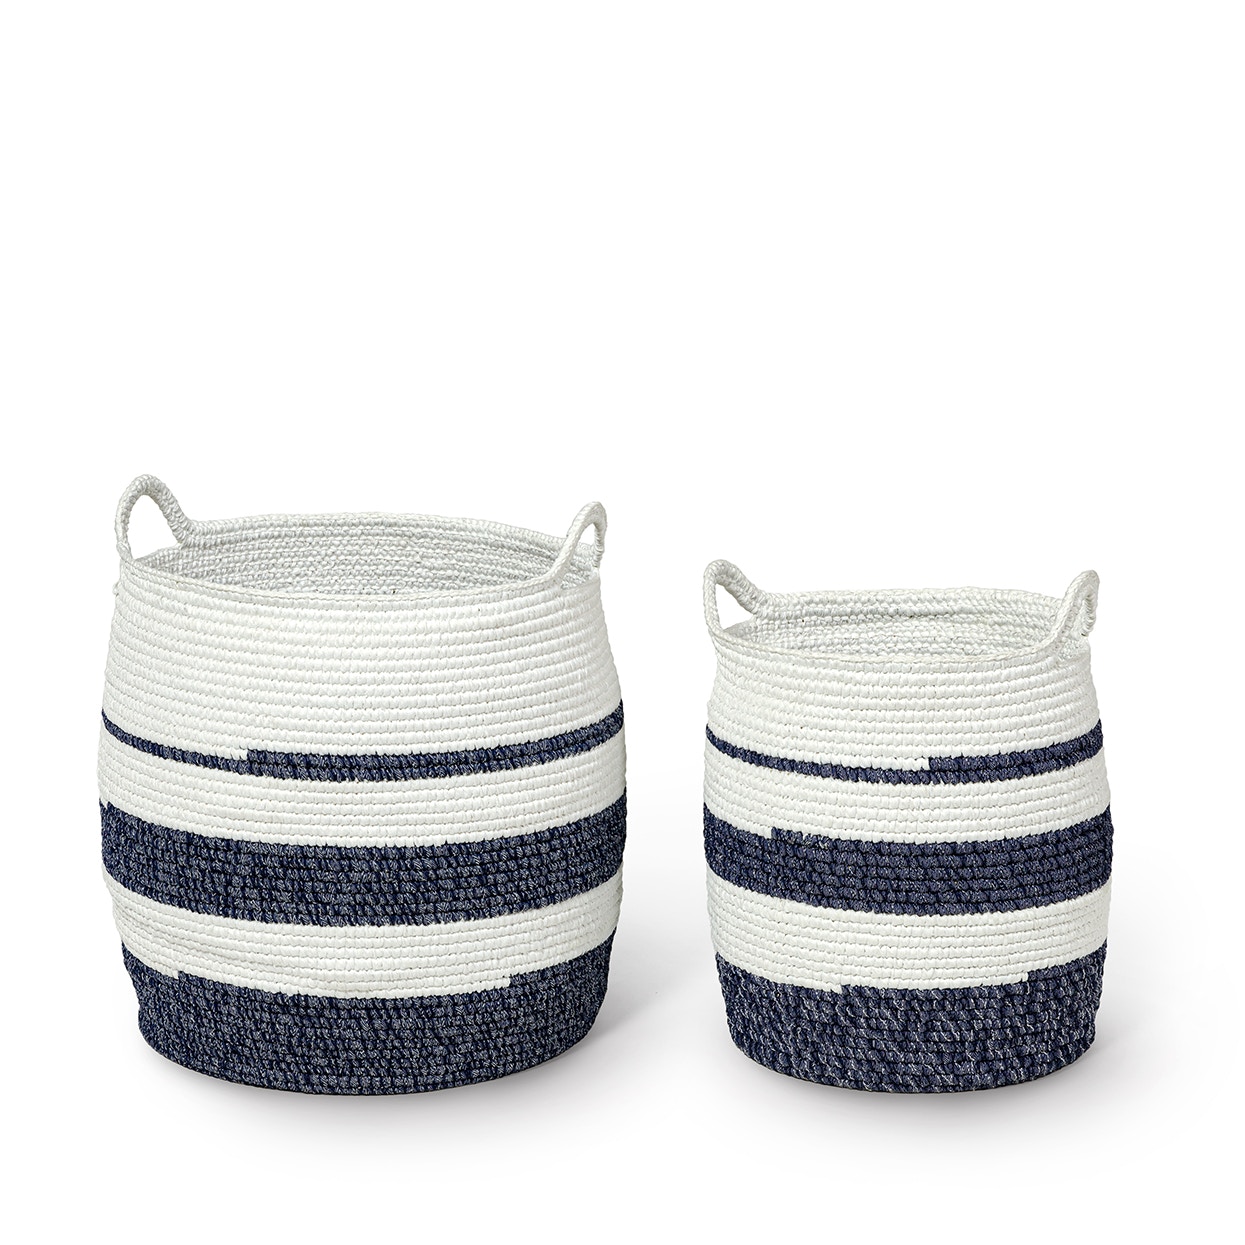 Basket with white and navy blue hand-woven cotton over rattan